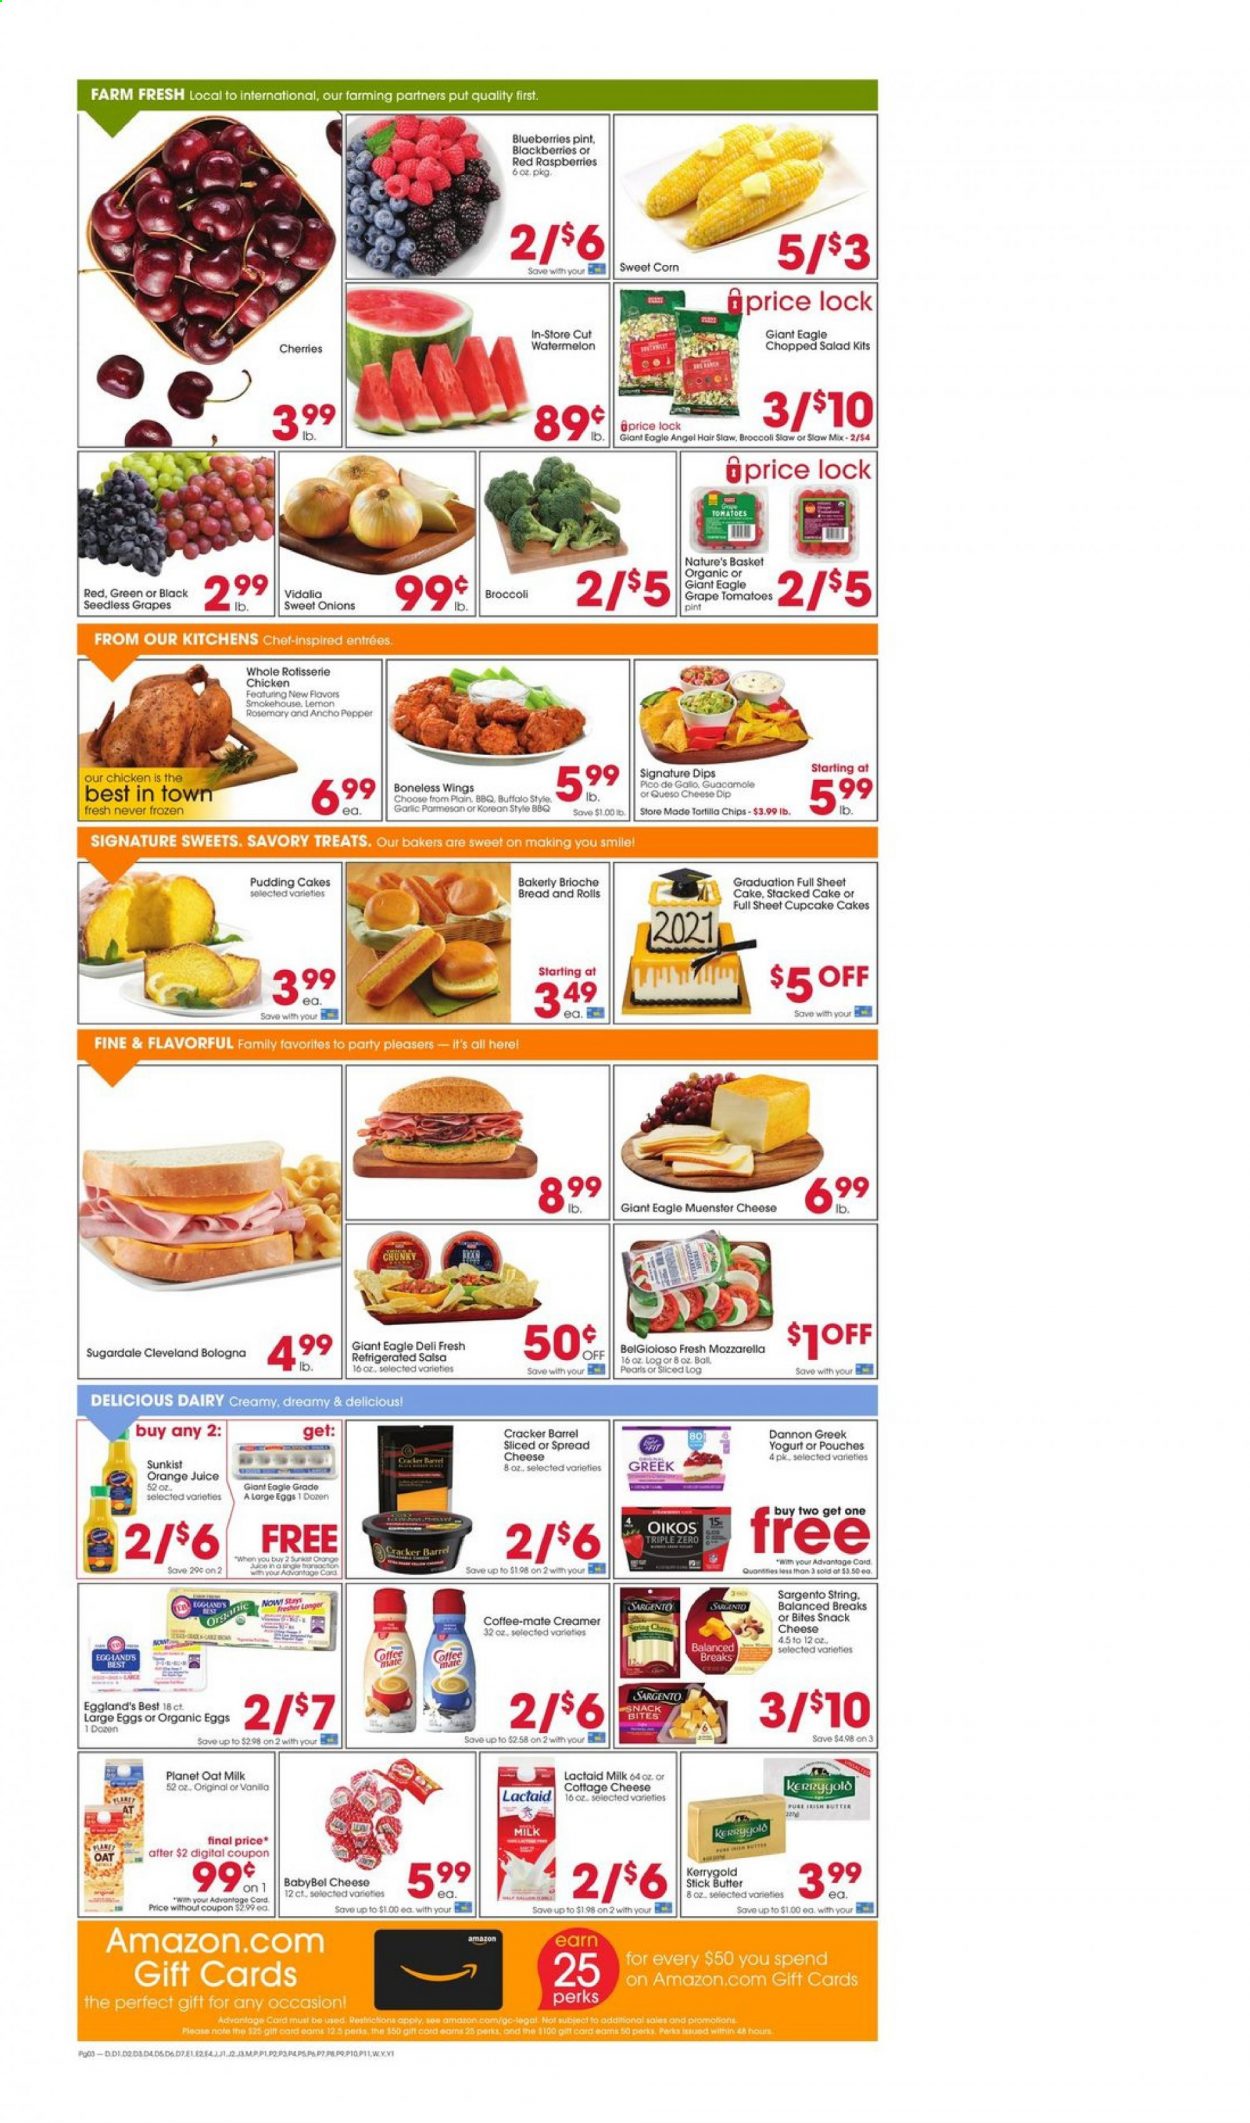 thumbnail - Giant Eagle Flyer - 06/17/2021 - 06/23/2021 - Sales products - seedless grapes, bread, cake, brioche, cupcake, broccoli, corn, garlic, tomatoes, salad, sweet corn, chopped salad, blackberries, blueberries, raspberries, watermelon, cherries, chicken roast, Sugardale, bologna sausage, cottage cheese, Lactaid, mozzarella, cheese, Münster cheese, Babybel, Sargento, greek yoghurt, yoghurt, Oikos, Dannon, Coffee-Mate, milk, oat milk, large eggs, butter, creamer, dip, snack, crackers, tortilla chips, rosemary, salsa, orange juice, juice, organic coffee, basket, Bakers. Page 2.